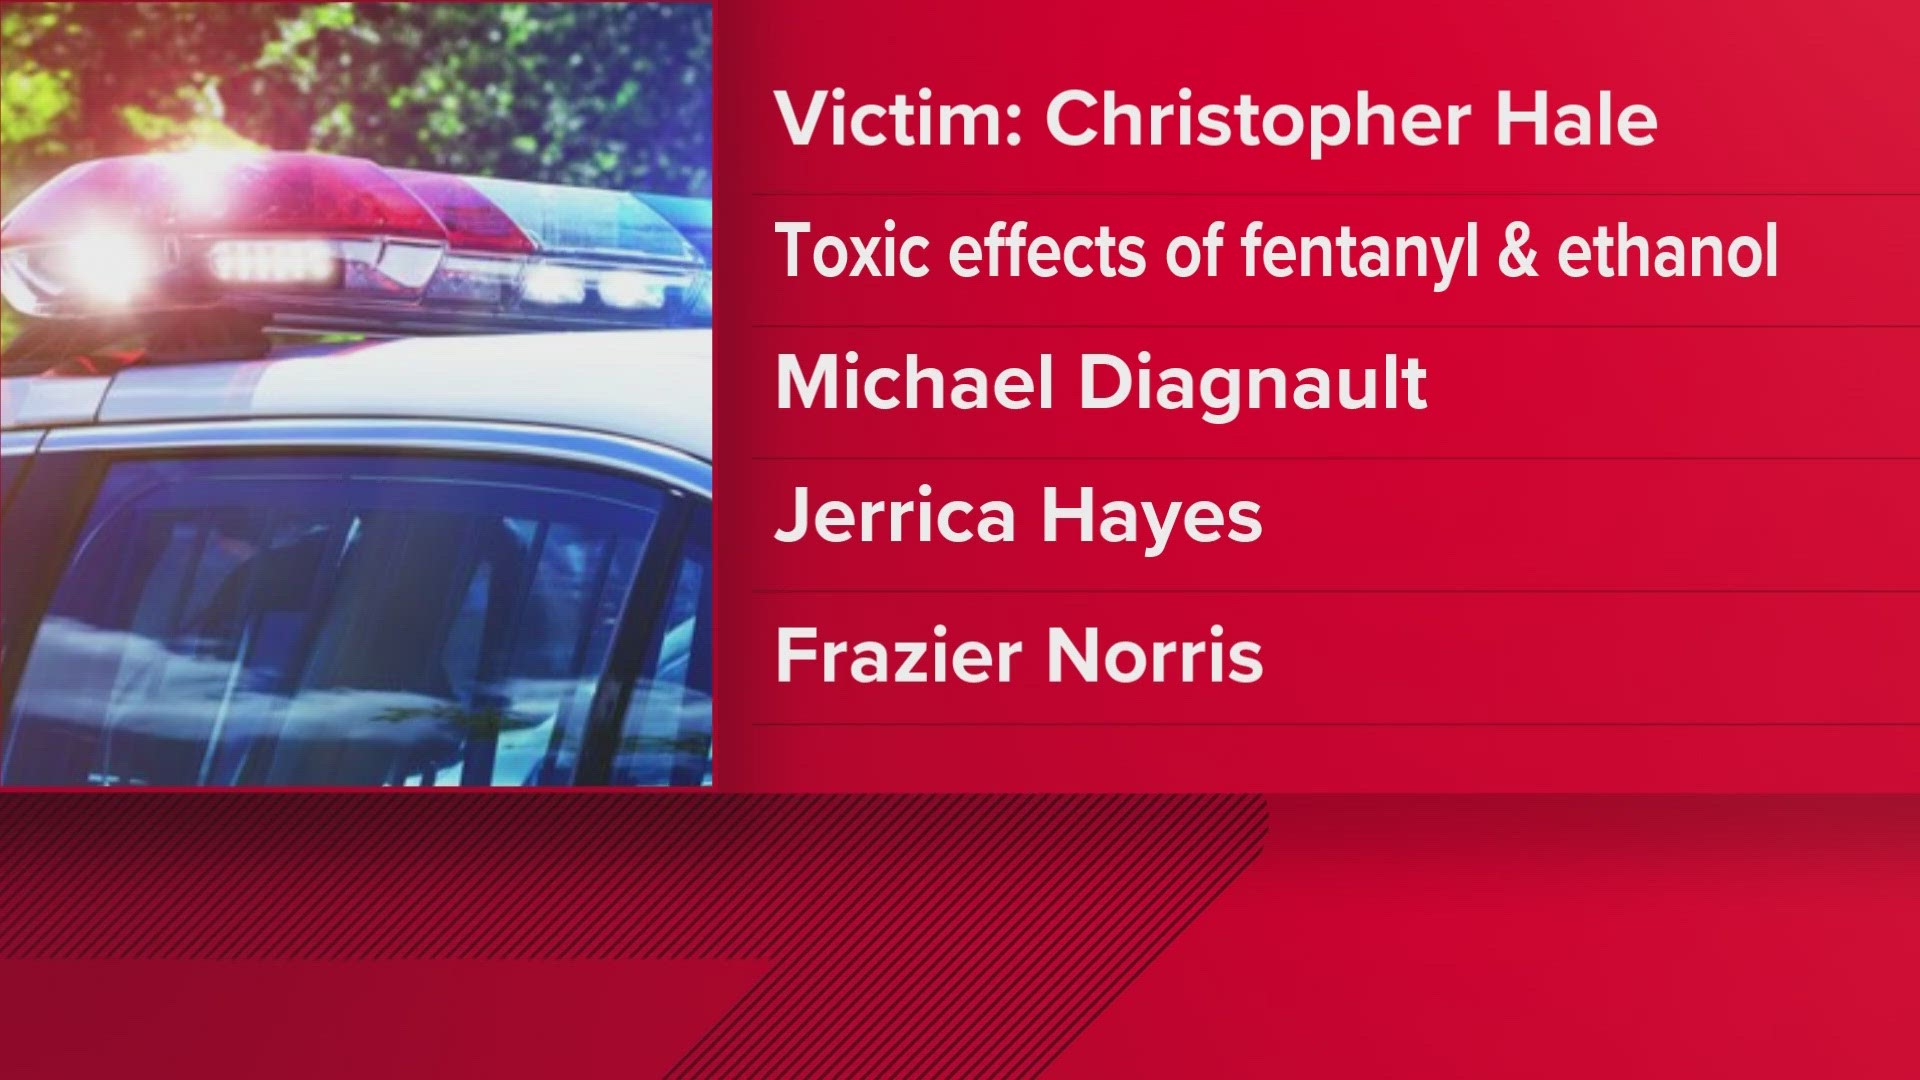 The man, Christopher Hale, died in July 2022 due to the combined effects of fentanyl and ethanol, according to the Tennessee Bureau of Investigation.